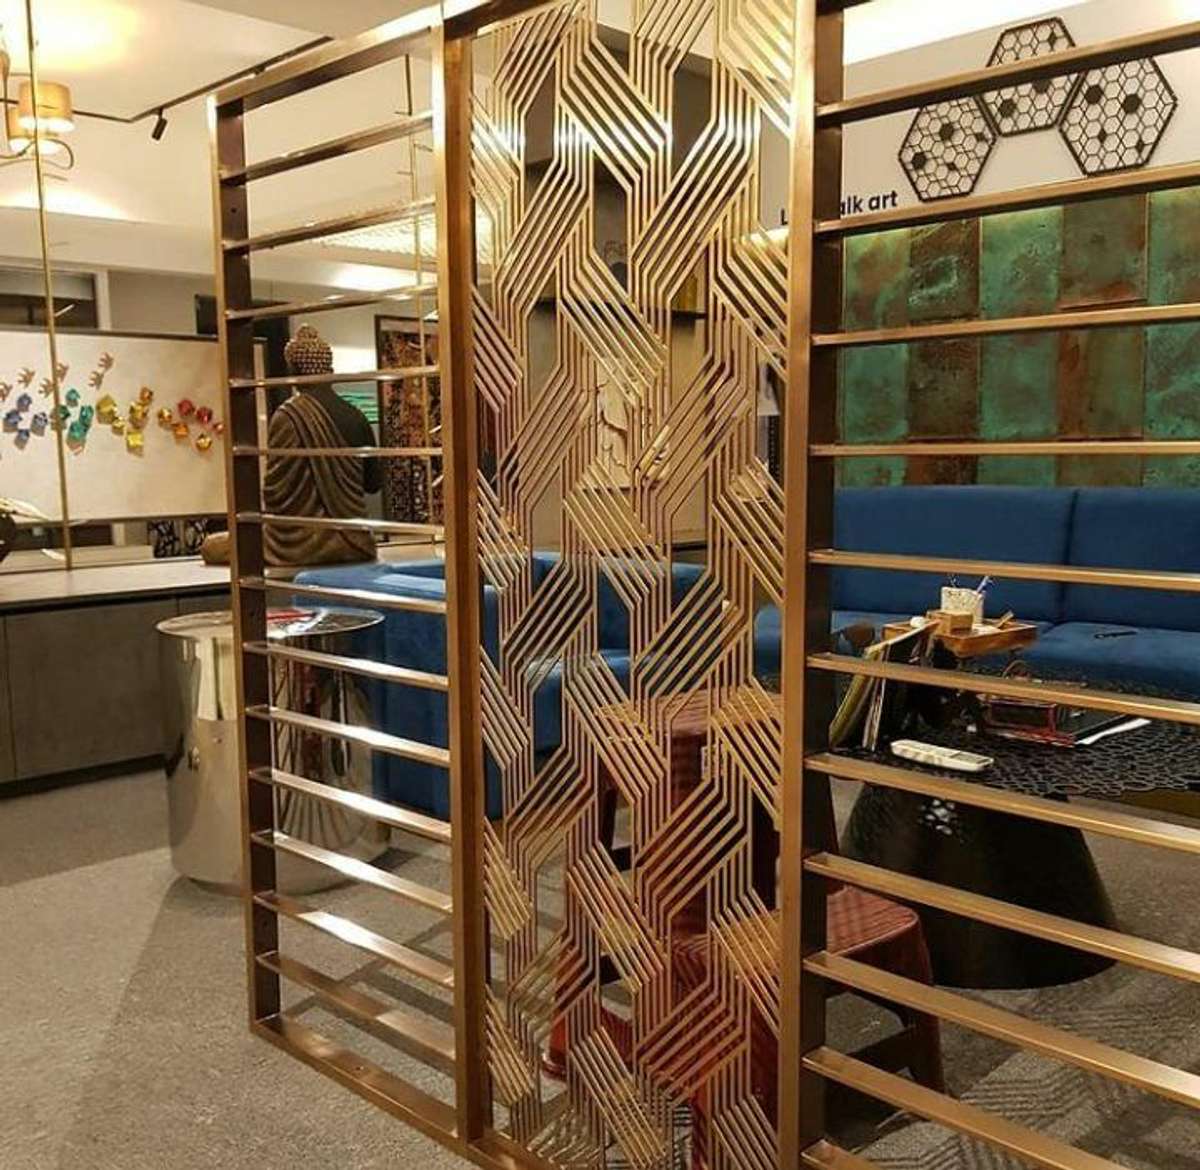 
Laser cut metal art Concept . Decorative partition Screen ,Stainless steel with pvd coating . Ours products most of them customised based on your needs.
